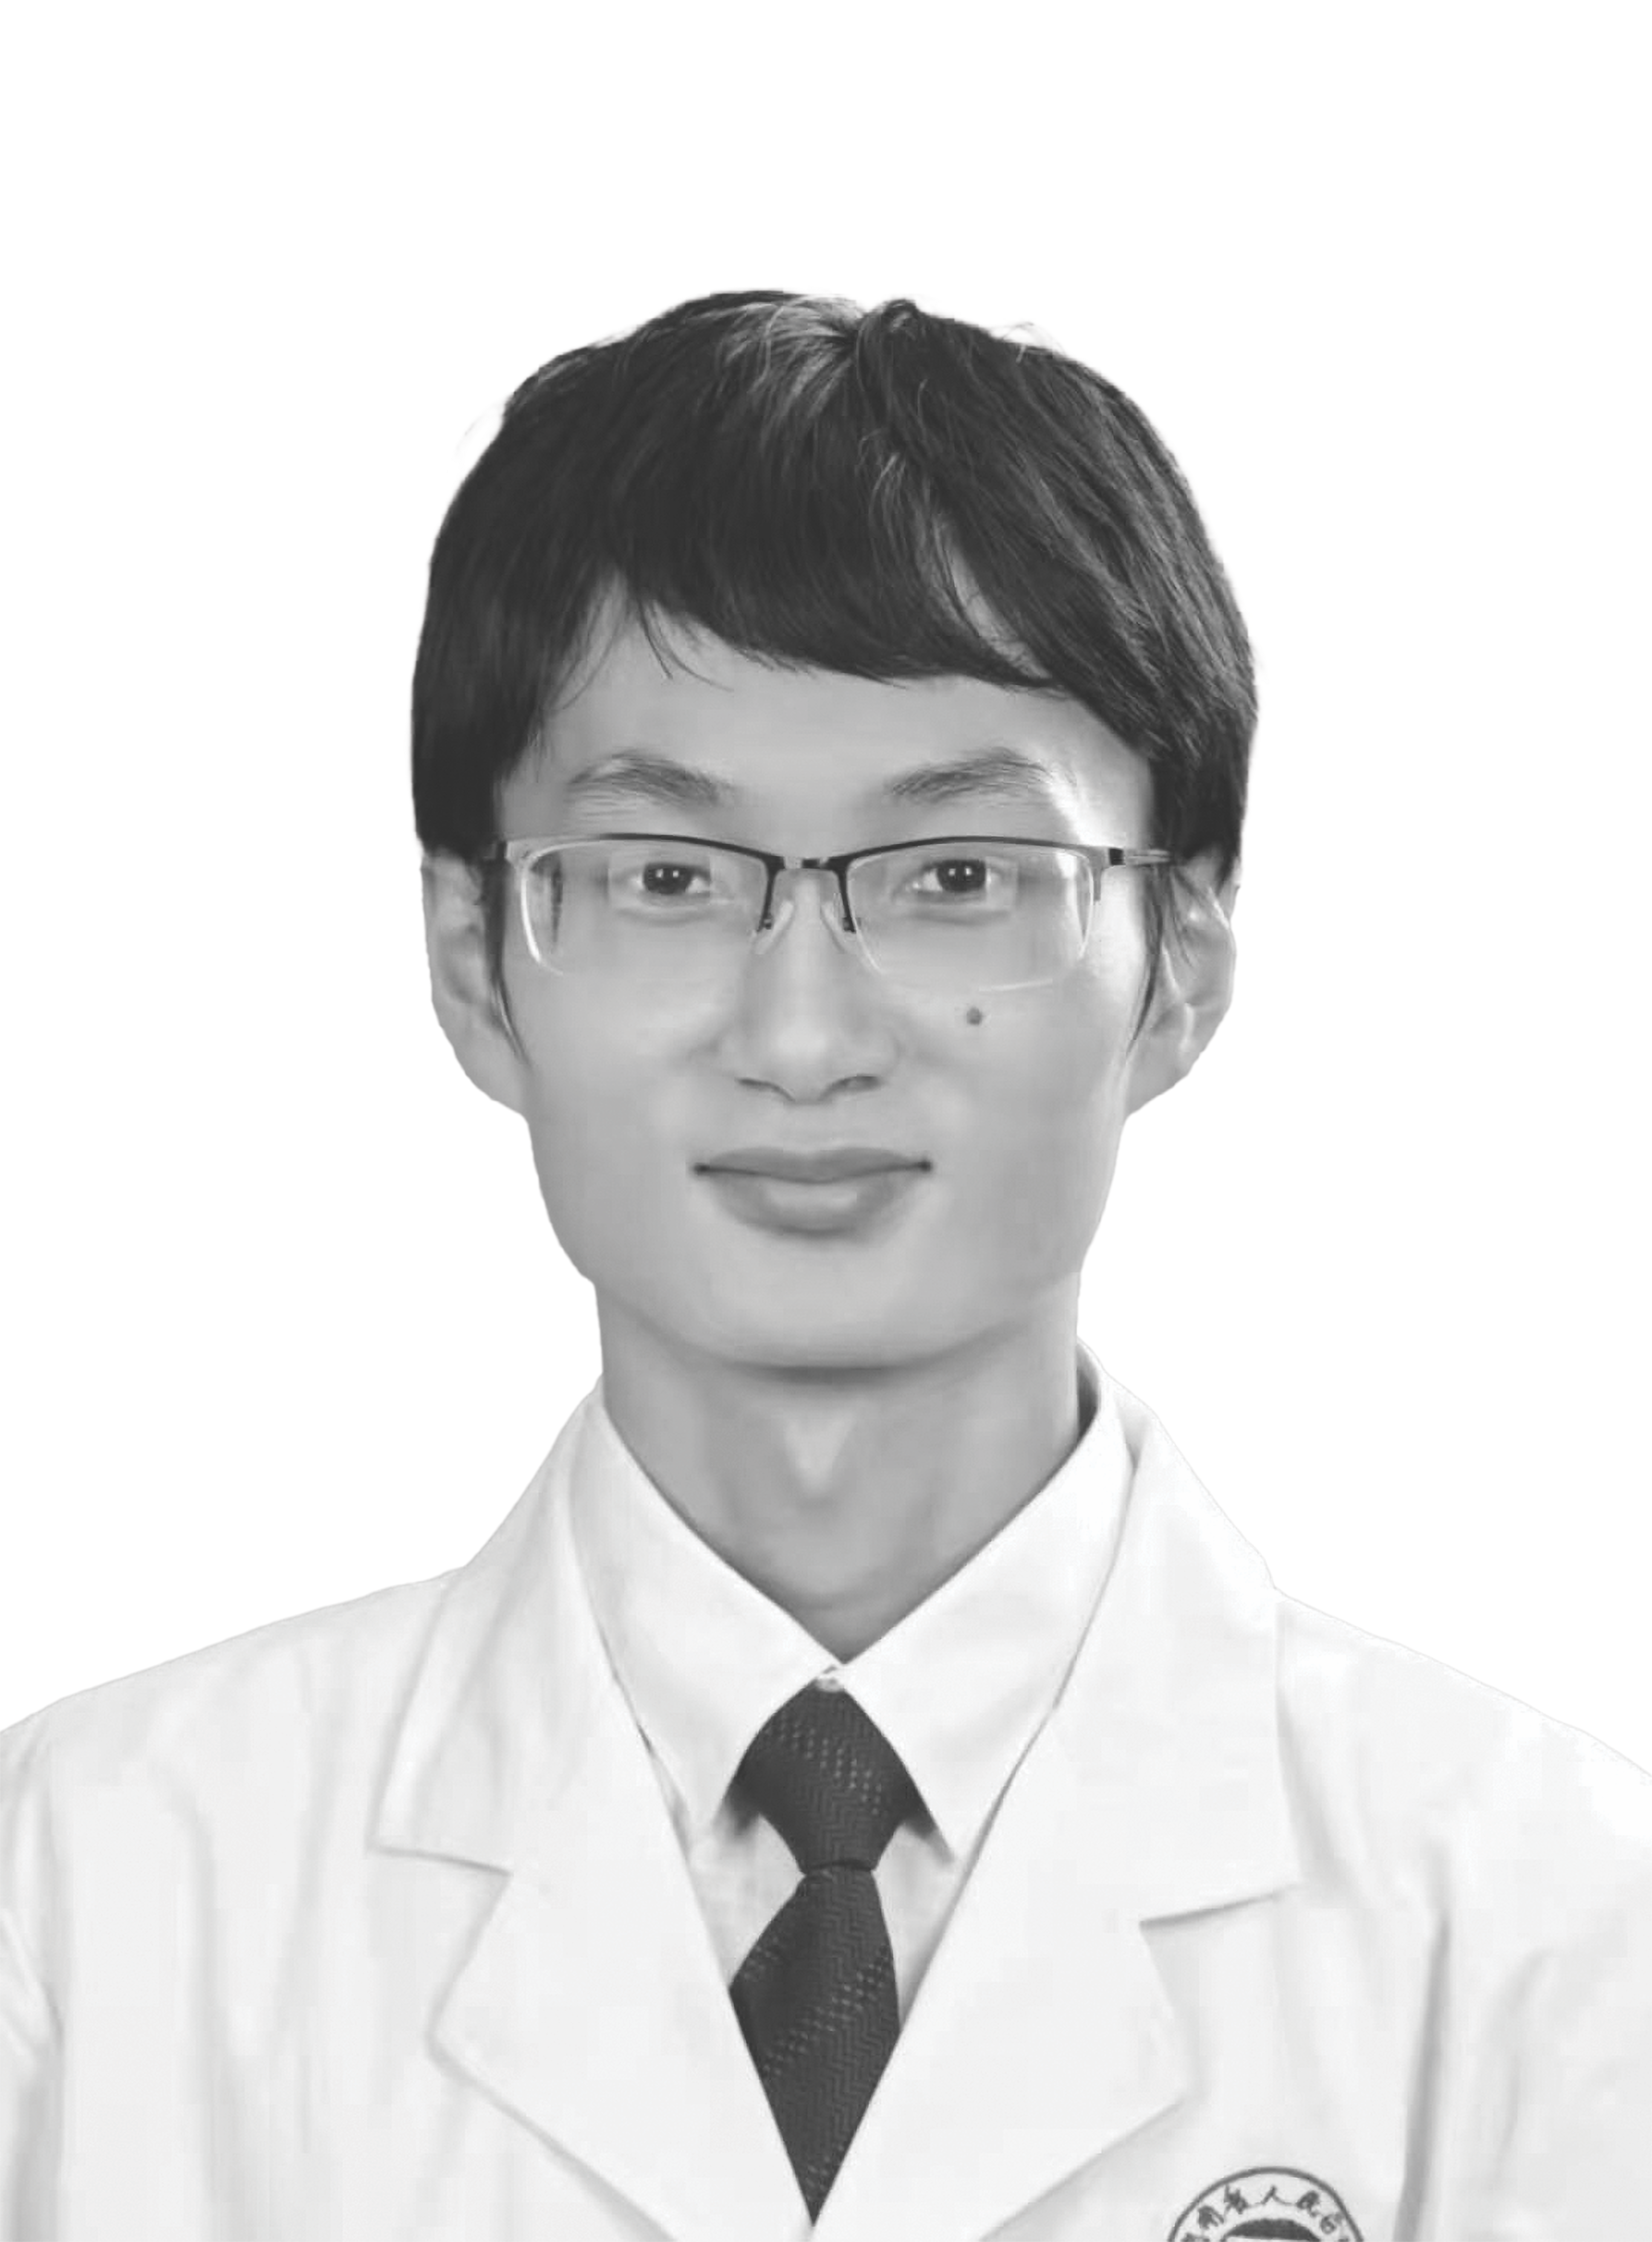 Lu is from the Department
of Oncology in the Hunan Provincial People’s Hospital/ The First Affiliated Hospital of Hunan Normal University in Changsha, Hunan, PR China